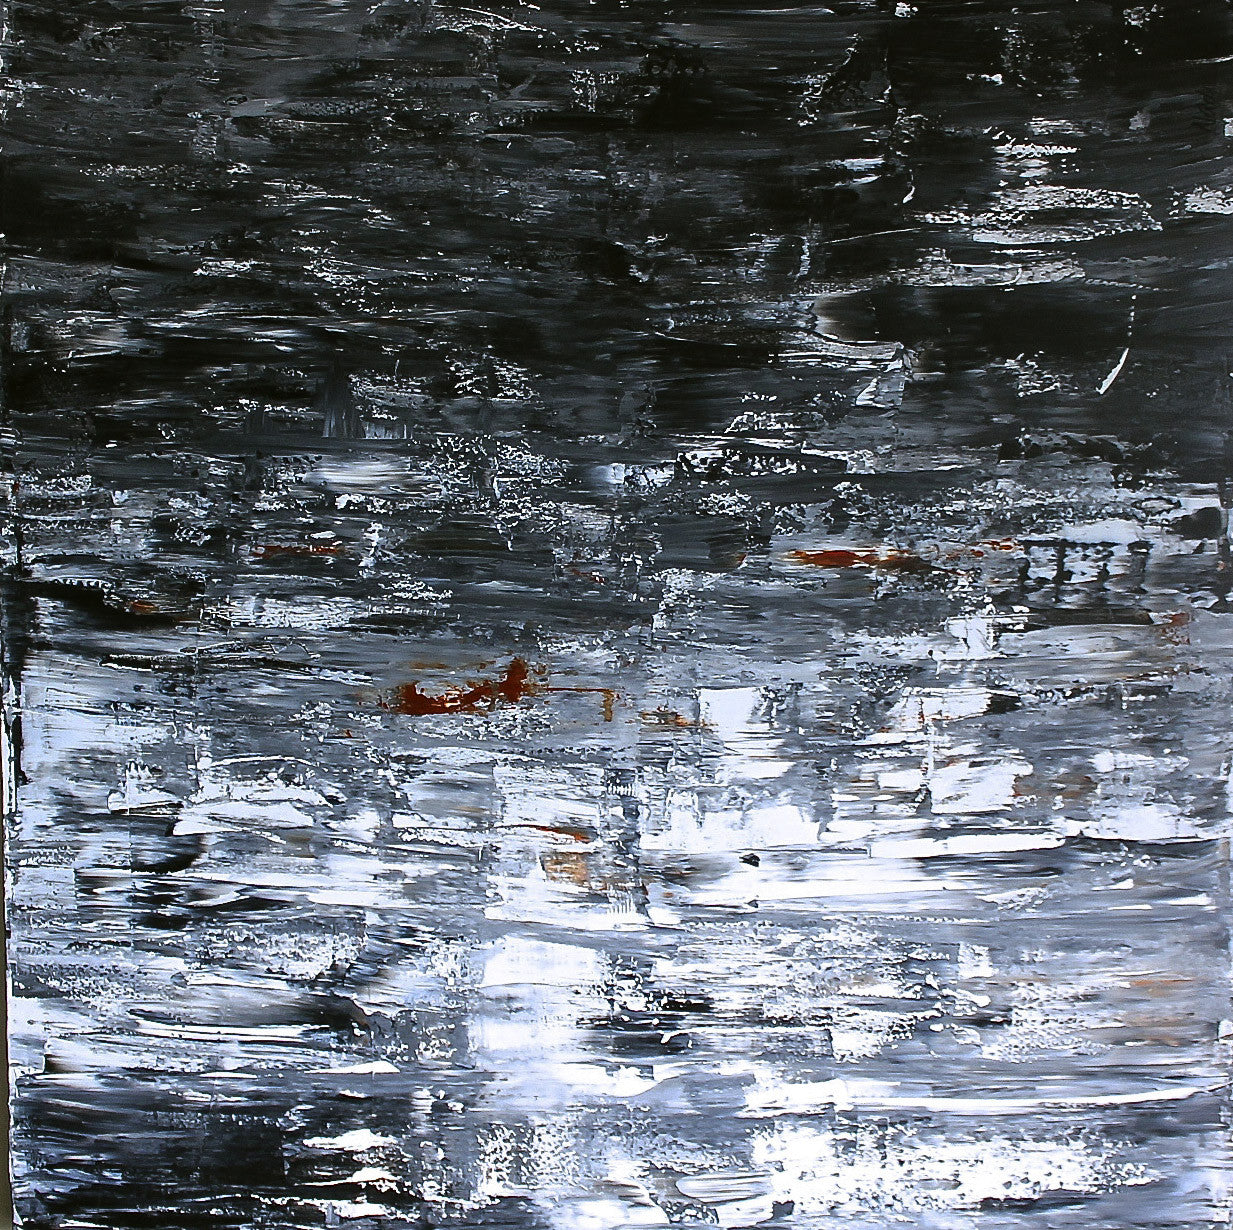 "Reflections" (48" x 48 "x 2") - SOLD